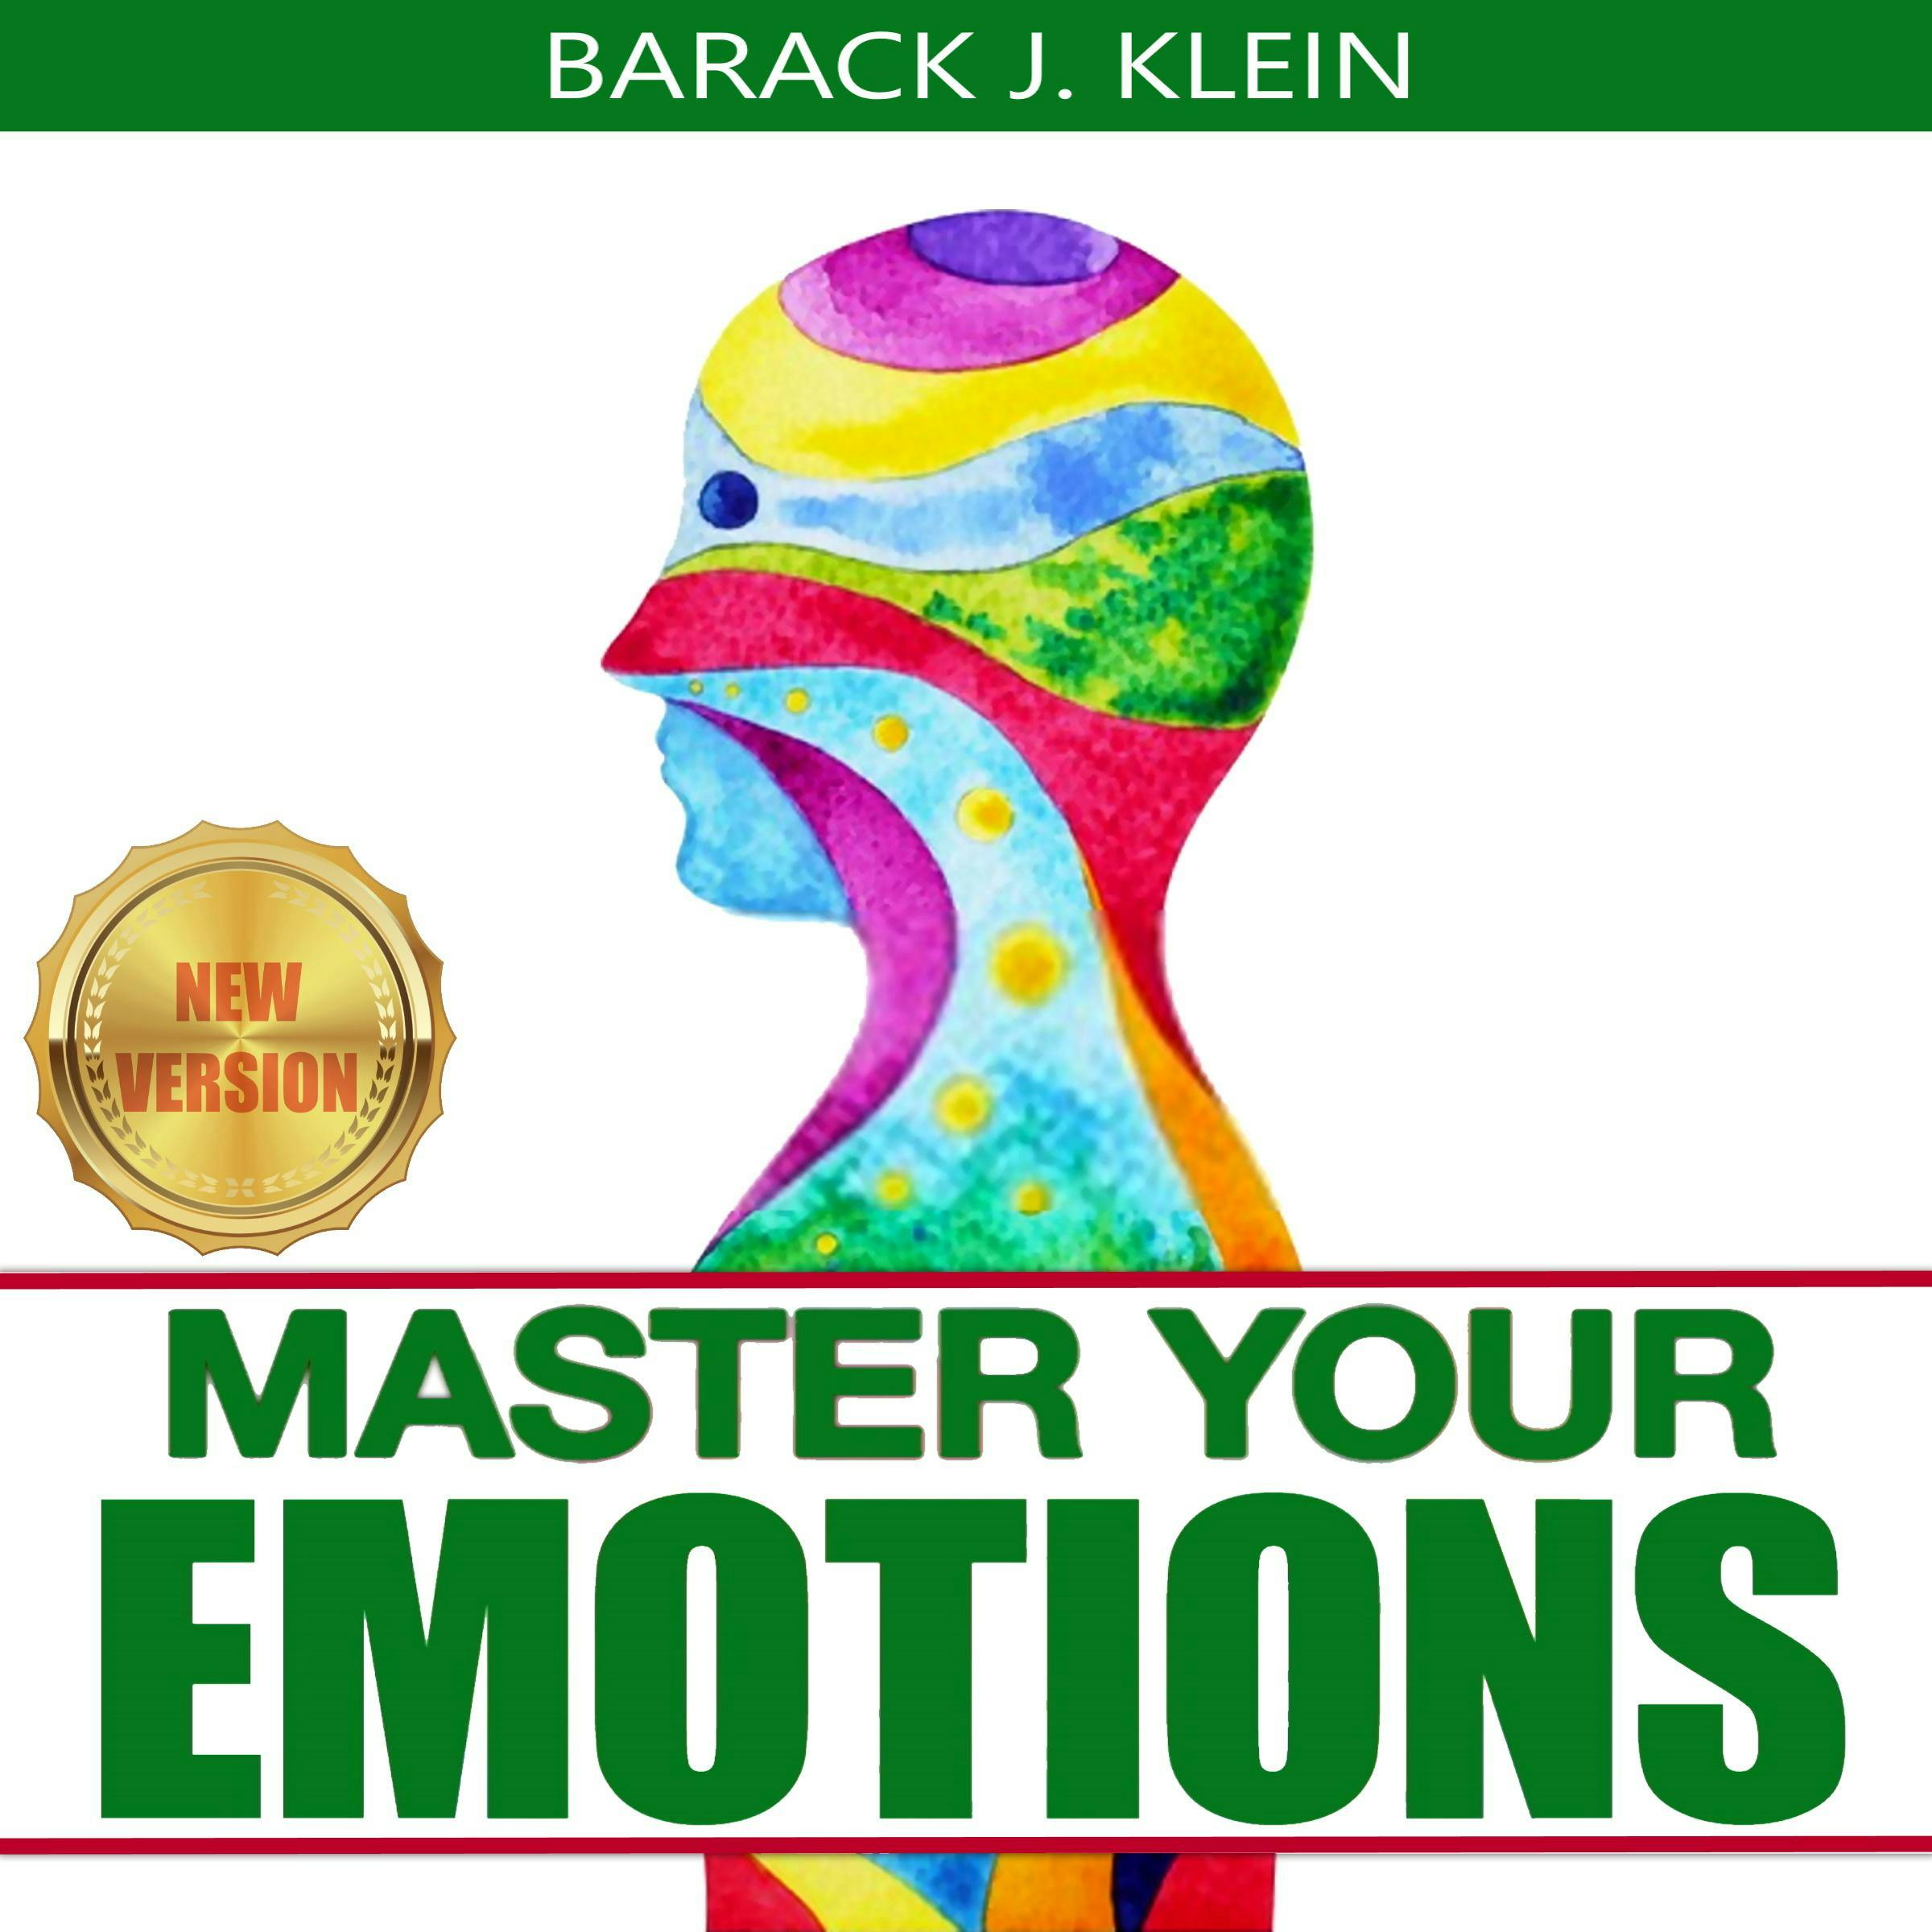 MASTER YOUR EMOTIONS: A Direct Path Through Mental Models, Cognitive Behavioral Therapy, Brain Improvement to Achieve Your Self-Esteem Goals & Overcome Negativity. NEW VERSION - BARACK J. KLEIN